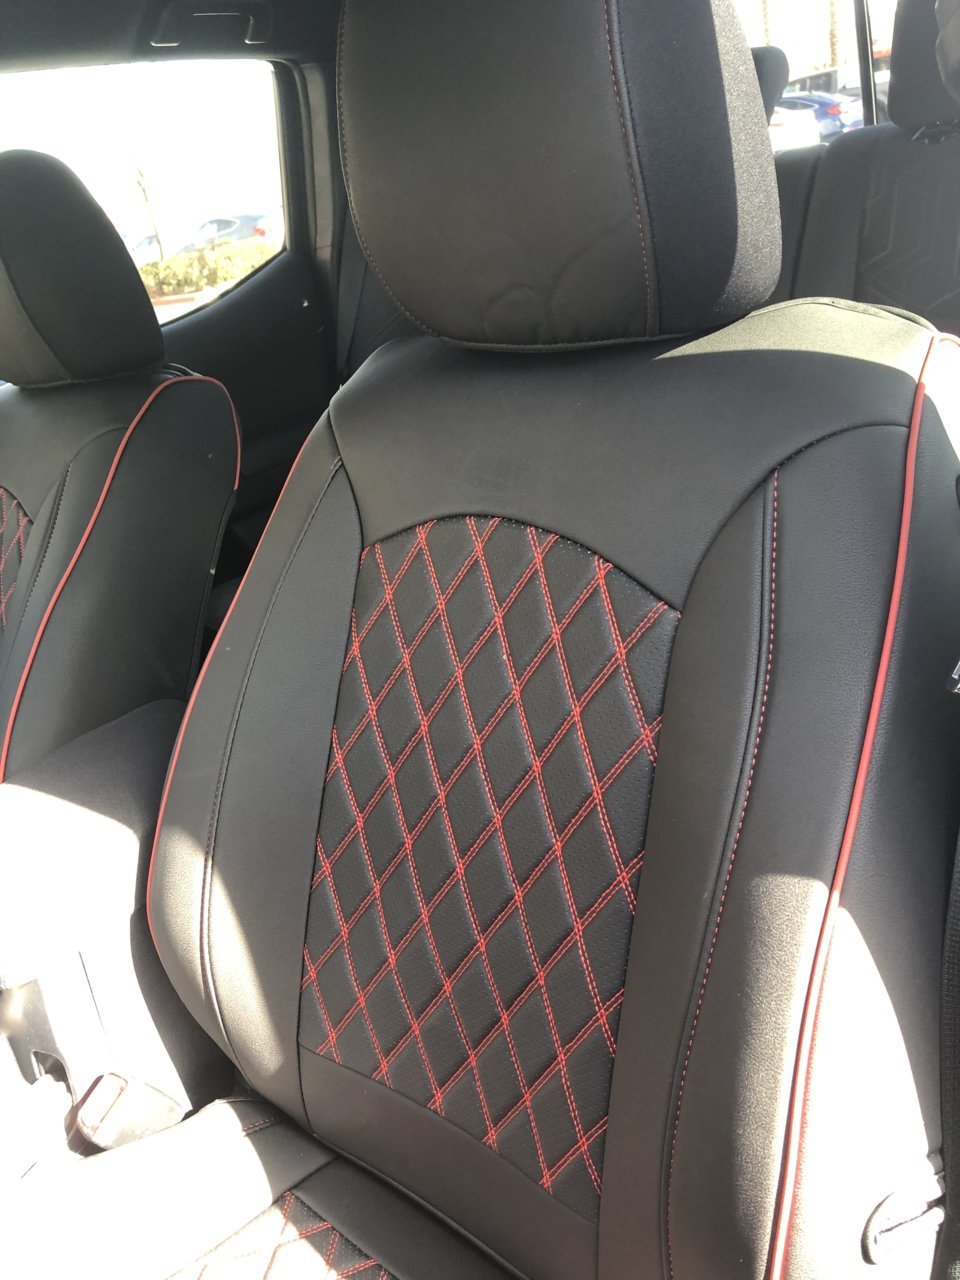 High Quality Seat Covers.. $$$ savings | Tacoma World 2019 Toyota Tacoma Trd Off Road Seat Covers